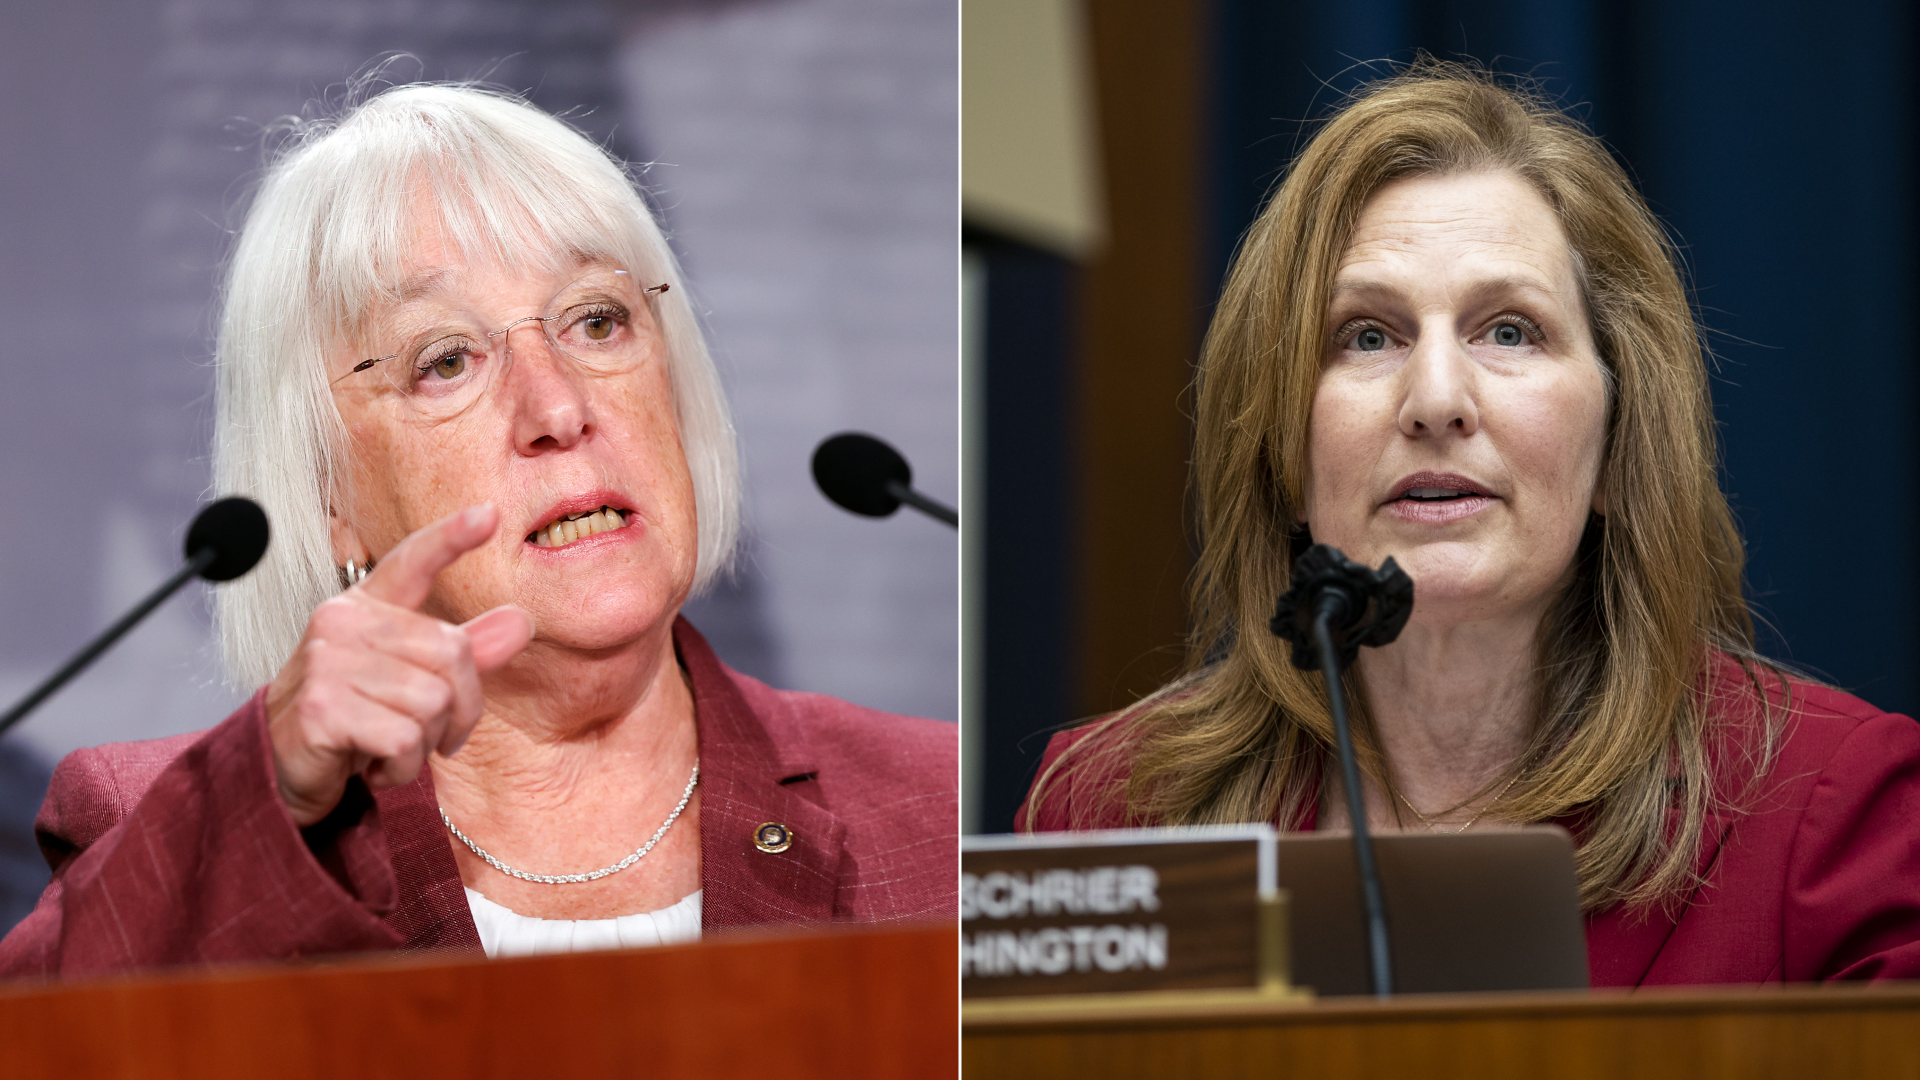 A splitscreen of Patty Murray in a maroon suit jacket behind a podium, pointing while speaking at left, and Kim Schrier seated in a congressional panel speaking into a microphone, also wearing maroon, at right. 